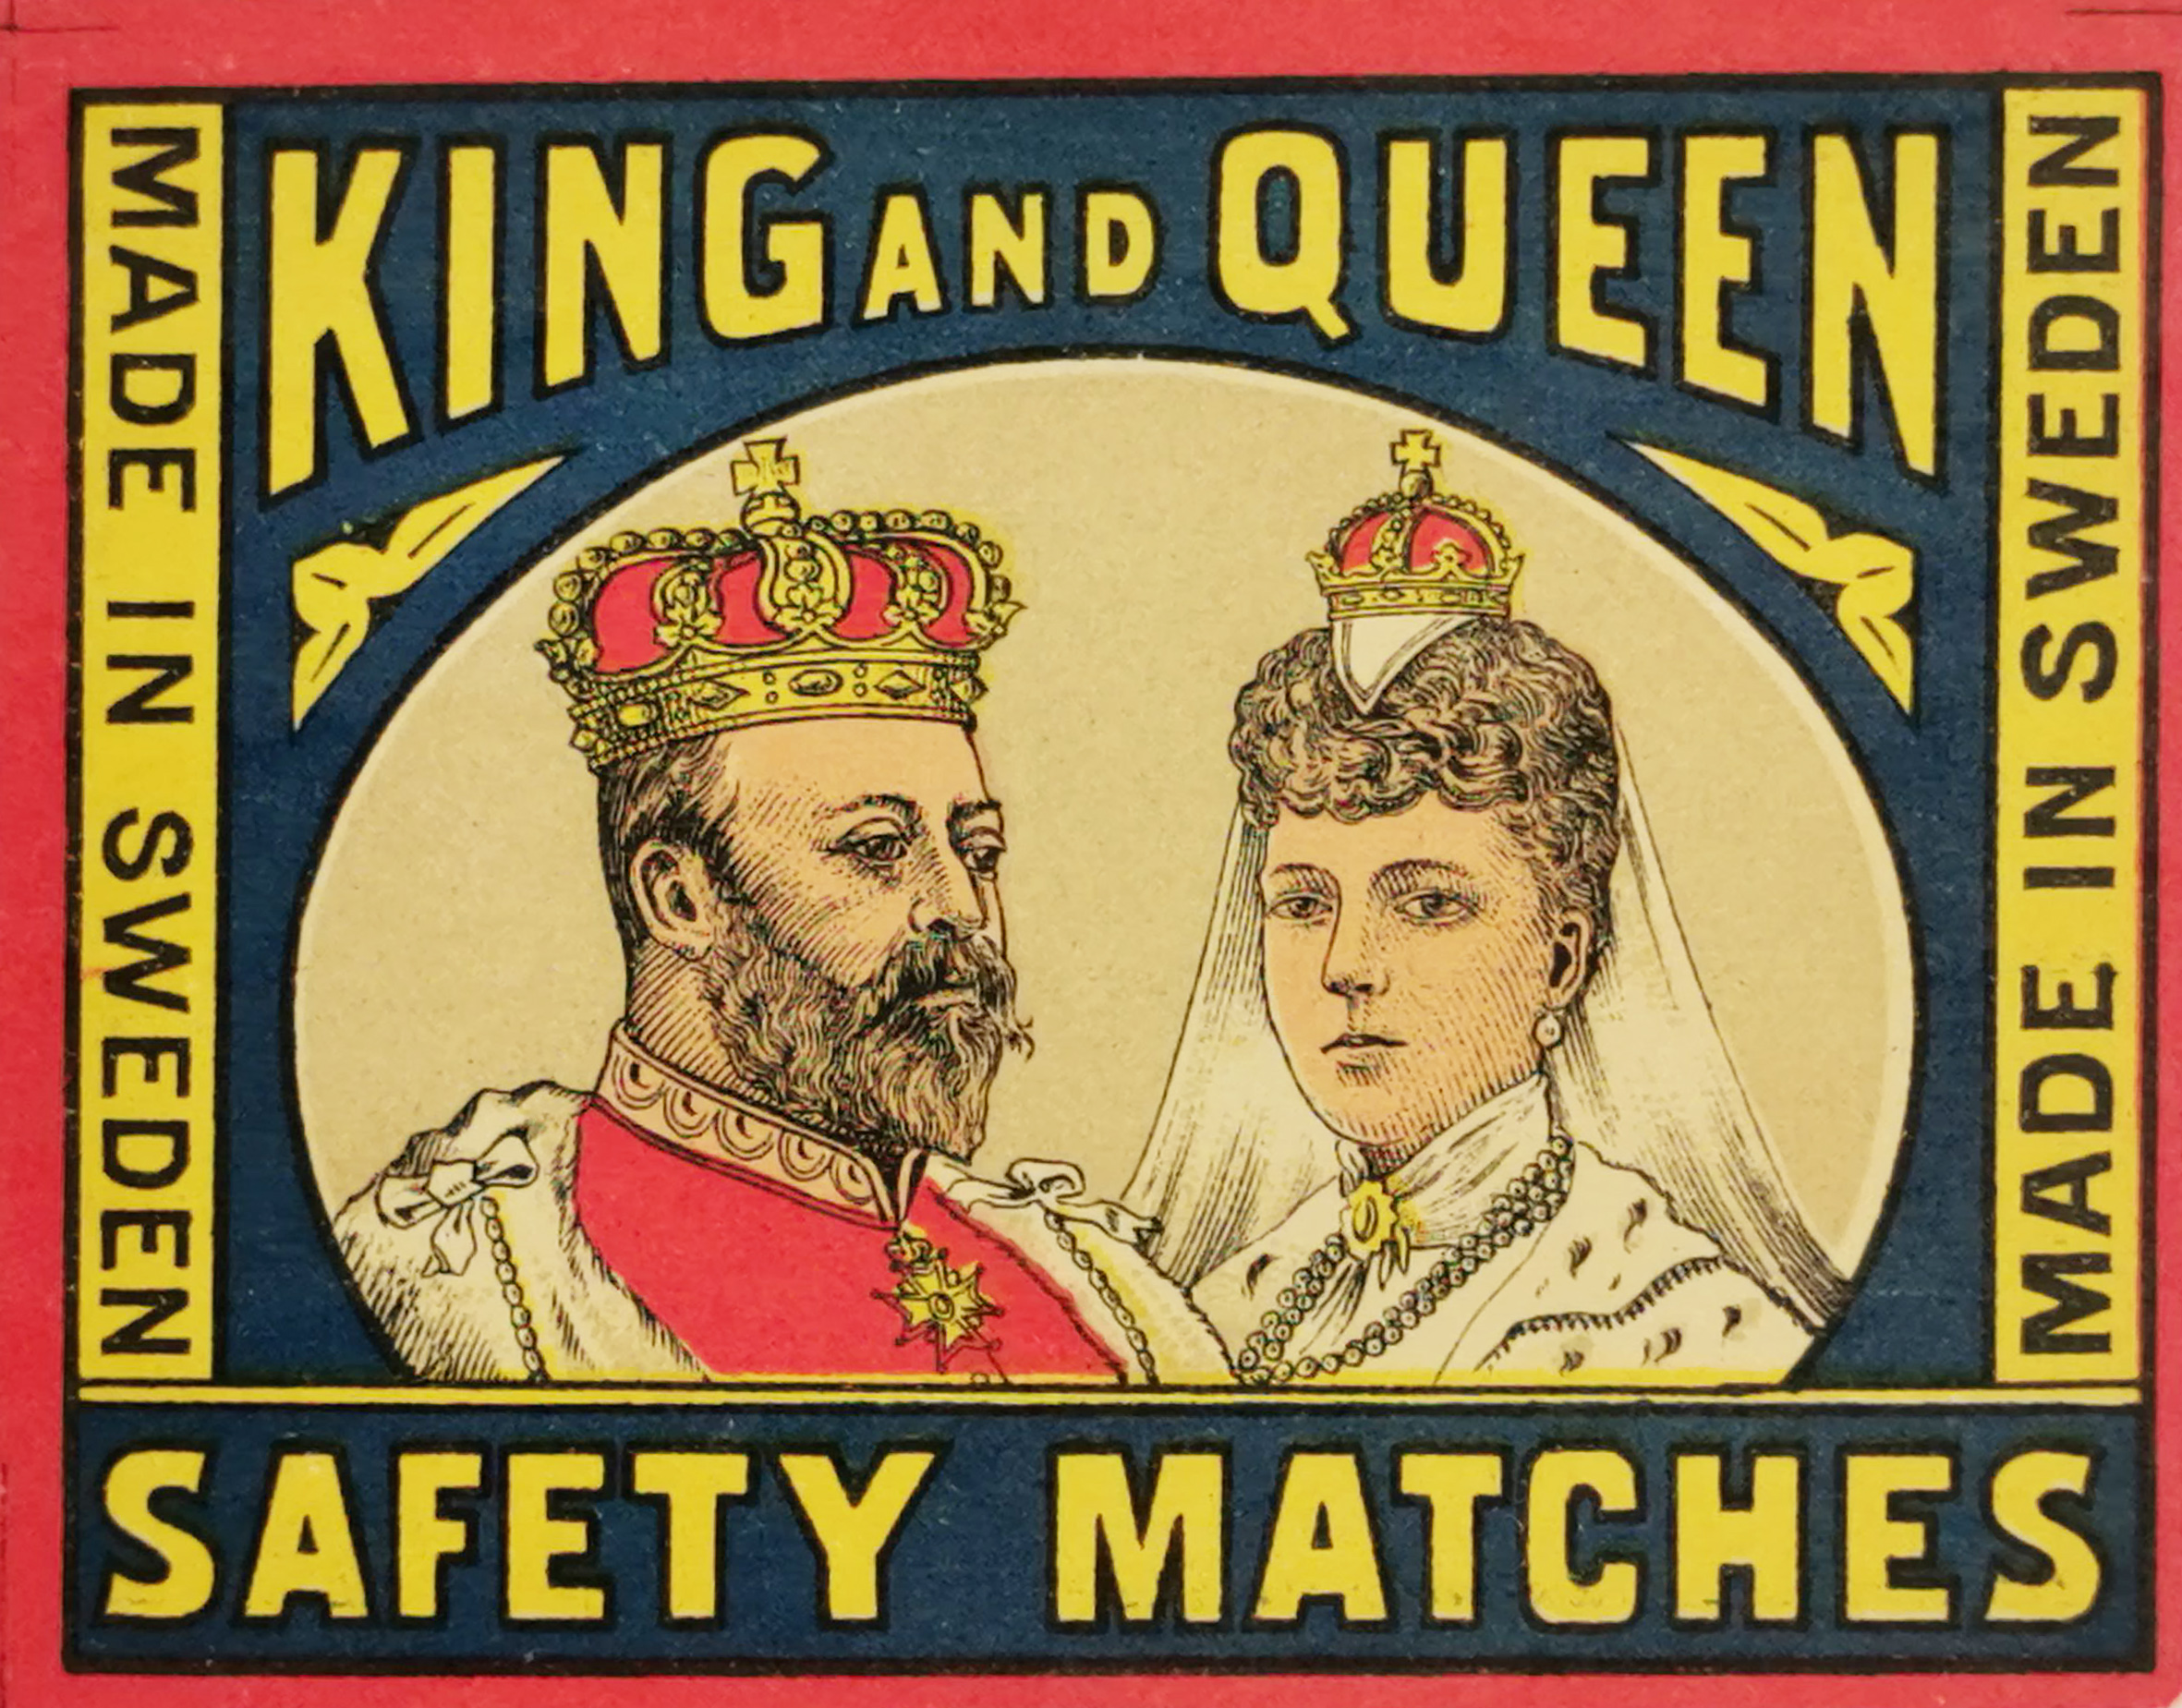 King and Queen. - Antique Print from 1920